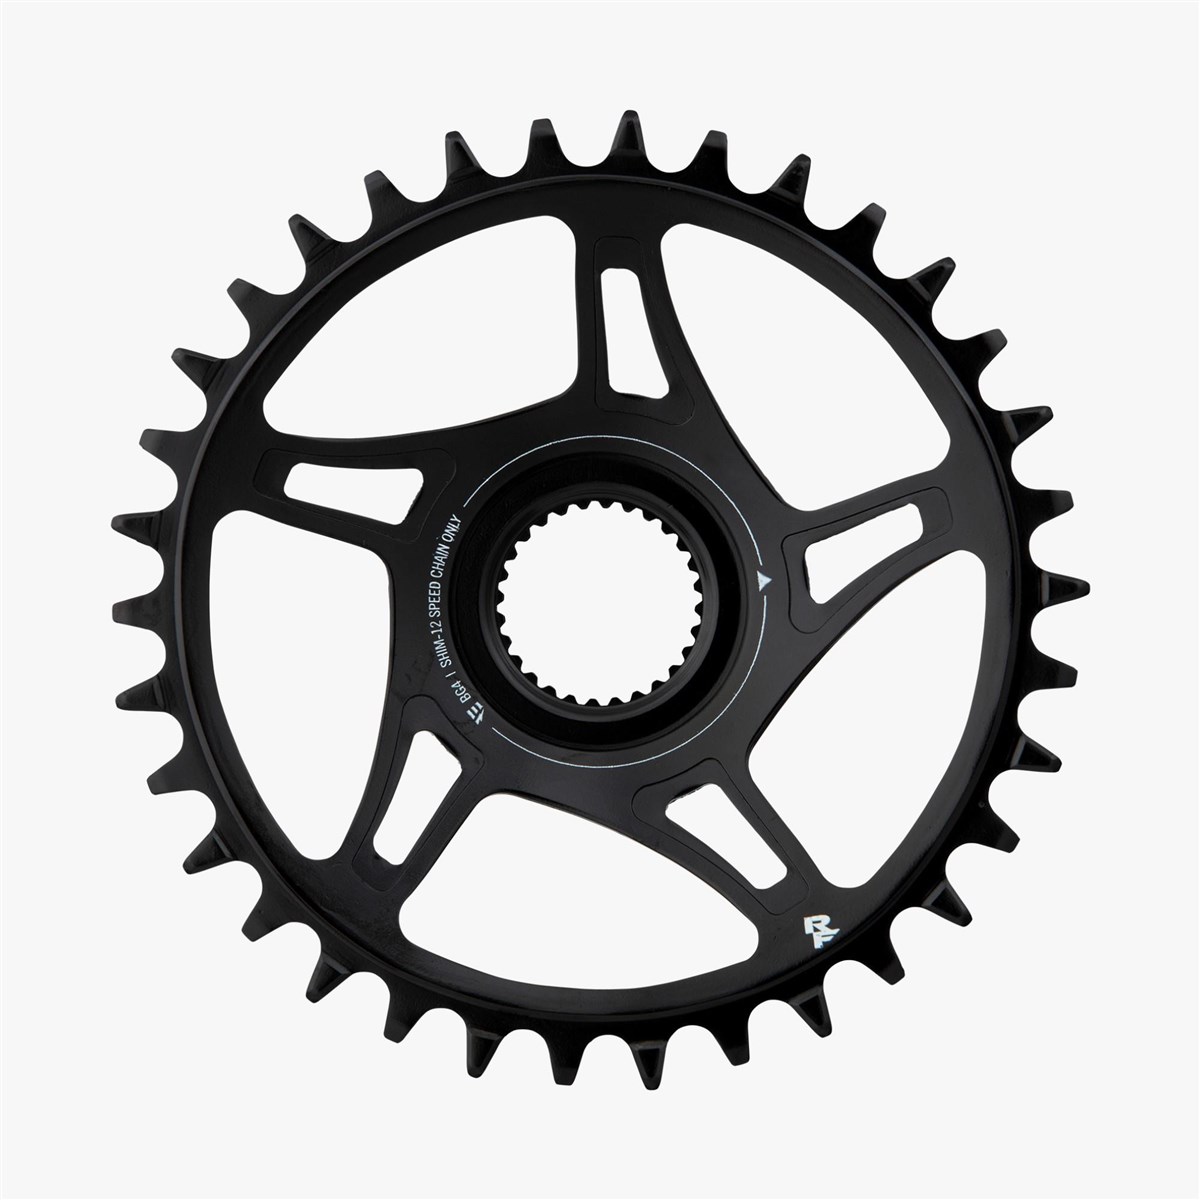 Race Face BOSCH G4 e-MTB Direct Mount Shimano 12 Speed Chainring product image